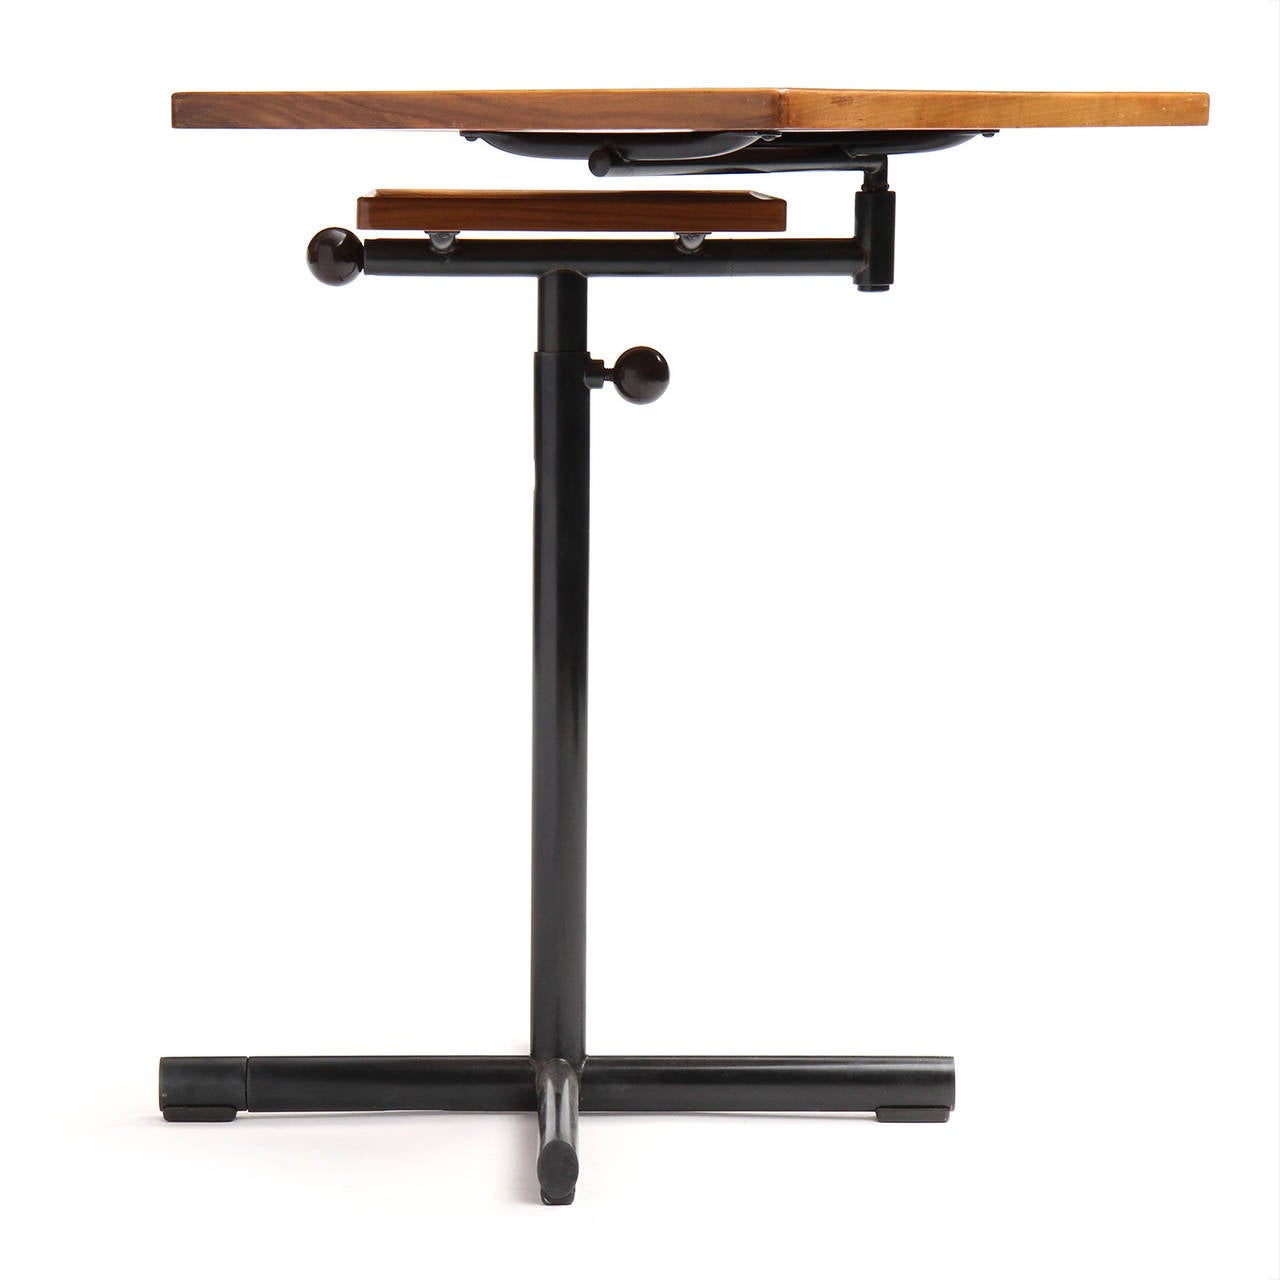 A beautifully engineered and highly adjustable two-tiered utility table having a pivoting and tilting top surface attached to a copper-plated steel cruciform base.